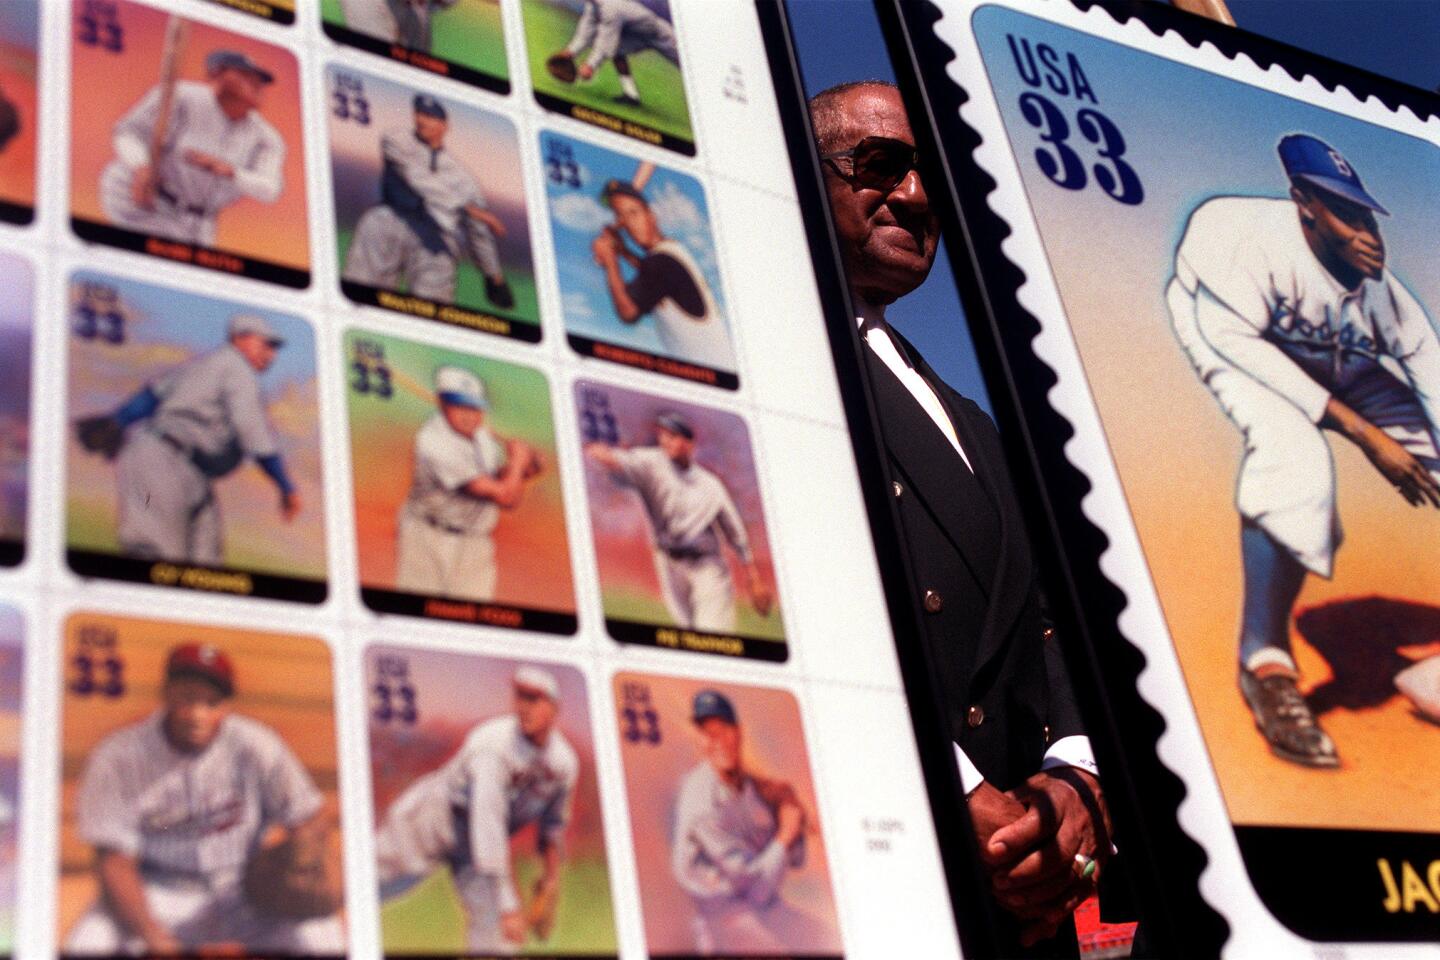 Dodgers pitcher, Madison native Don Newcombe has died